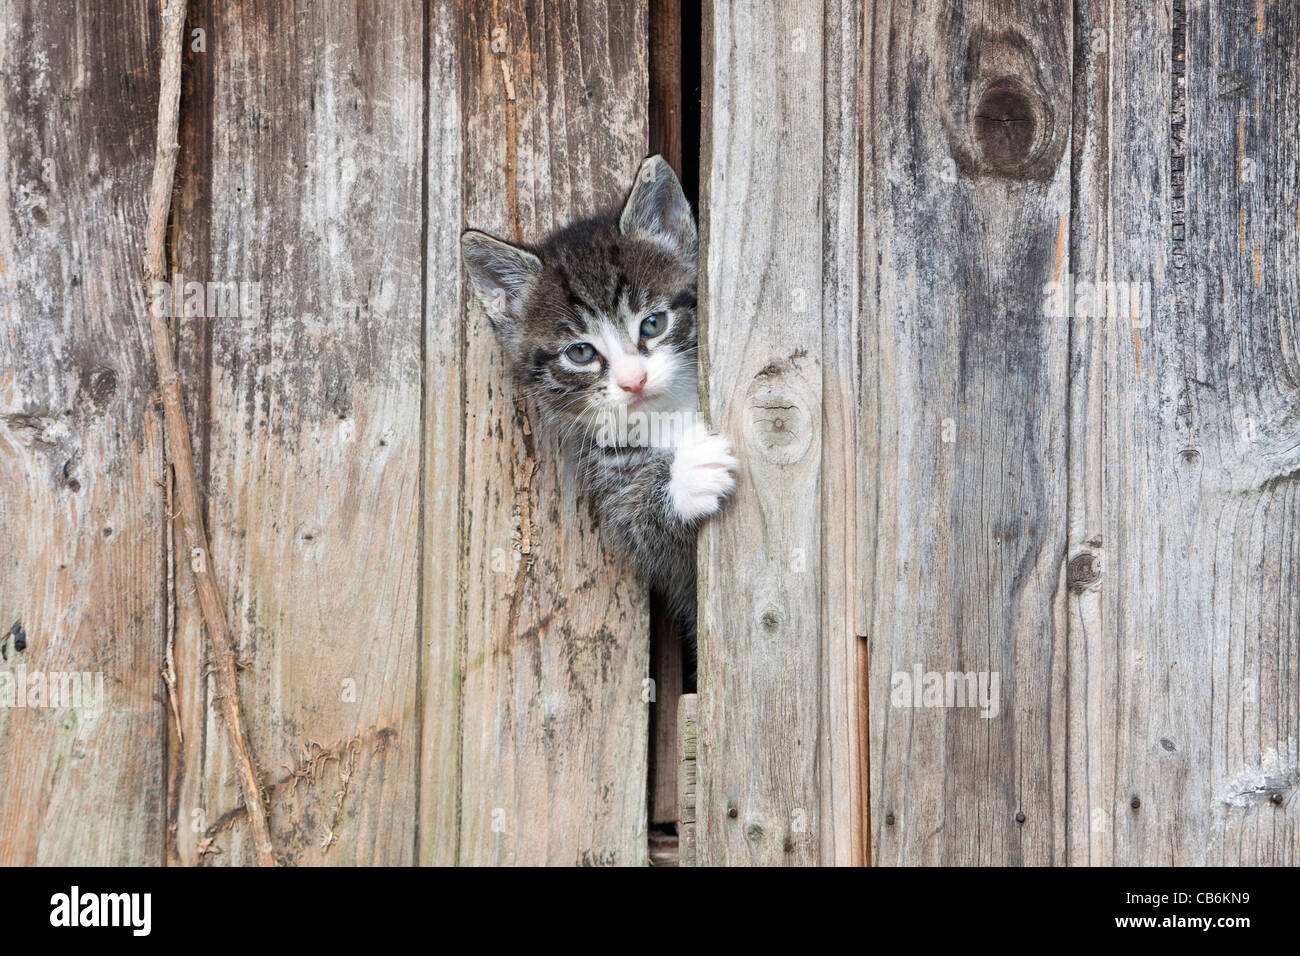 Kitten, looking out of garden shed door, Lower Saxony, Germany Stock Photo